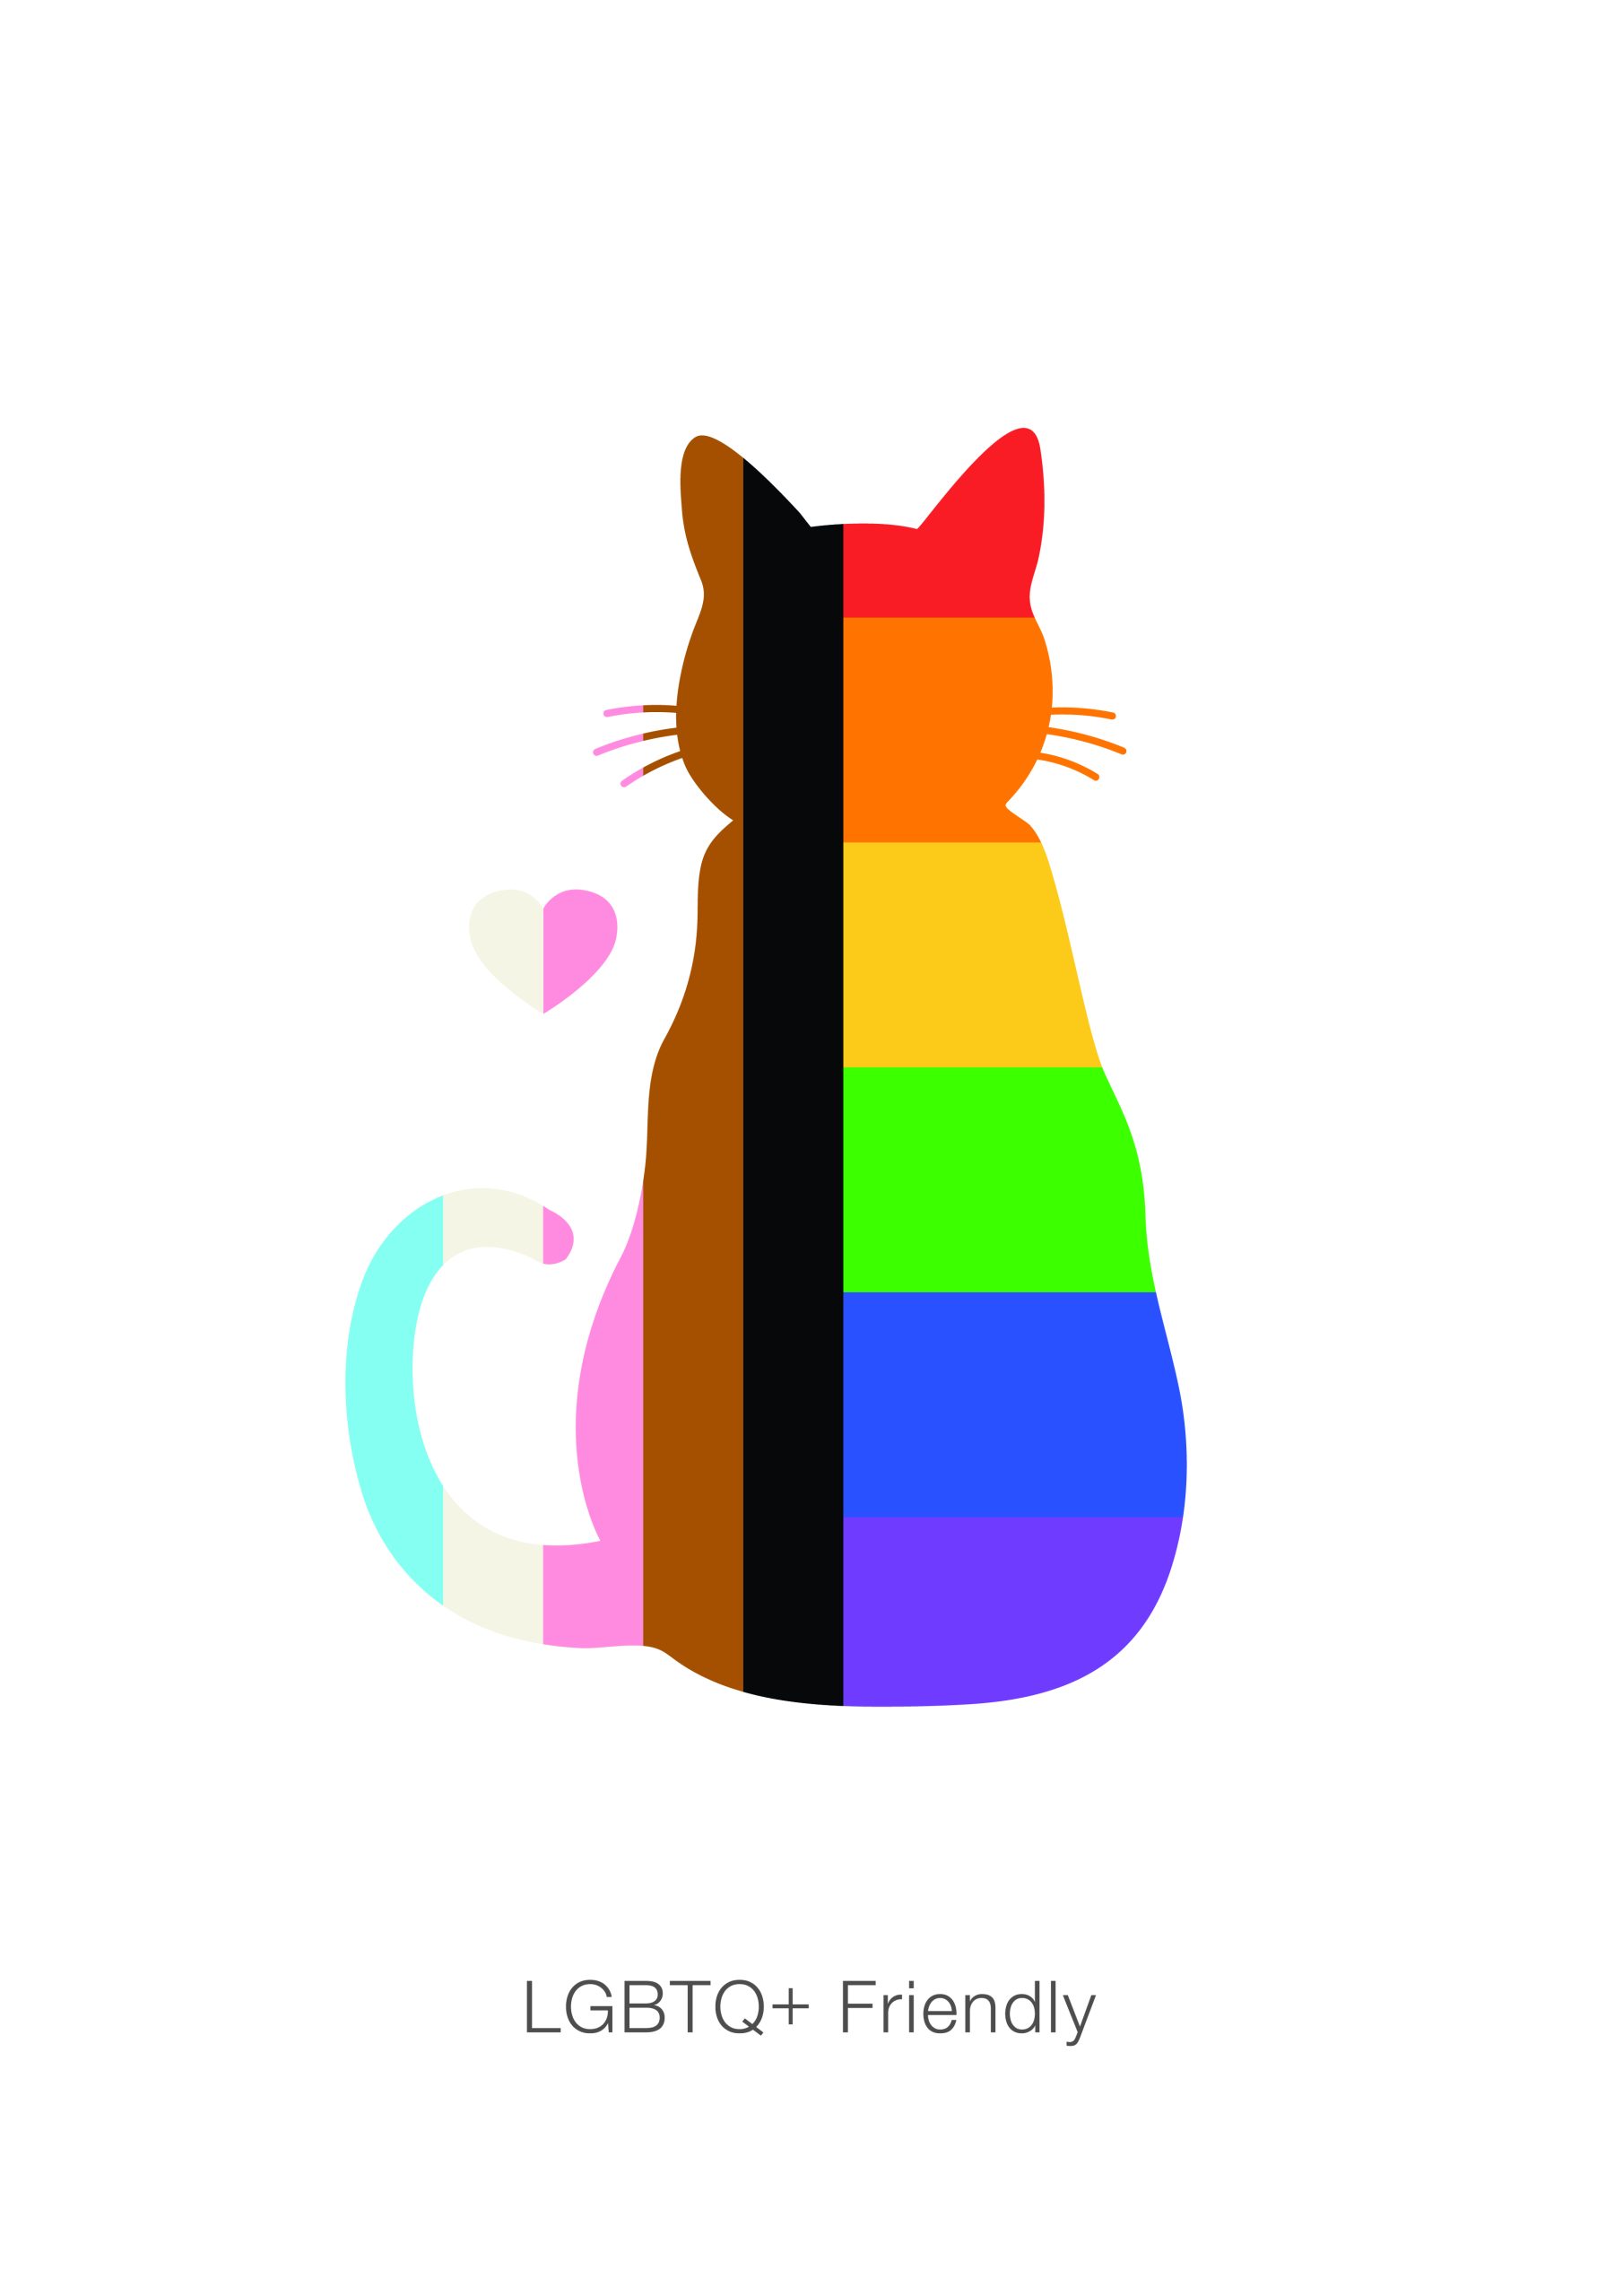 Silhouette of a cat with a rainbow pride flag masked on top. Text saying 'LGBTIQI+ friendly'.